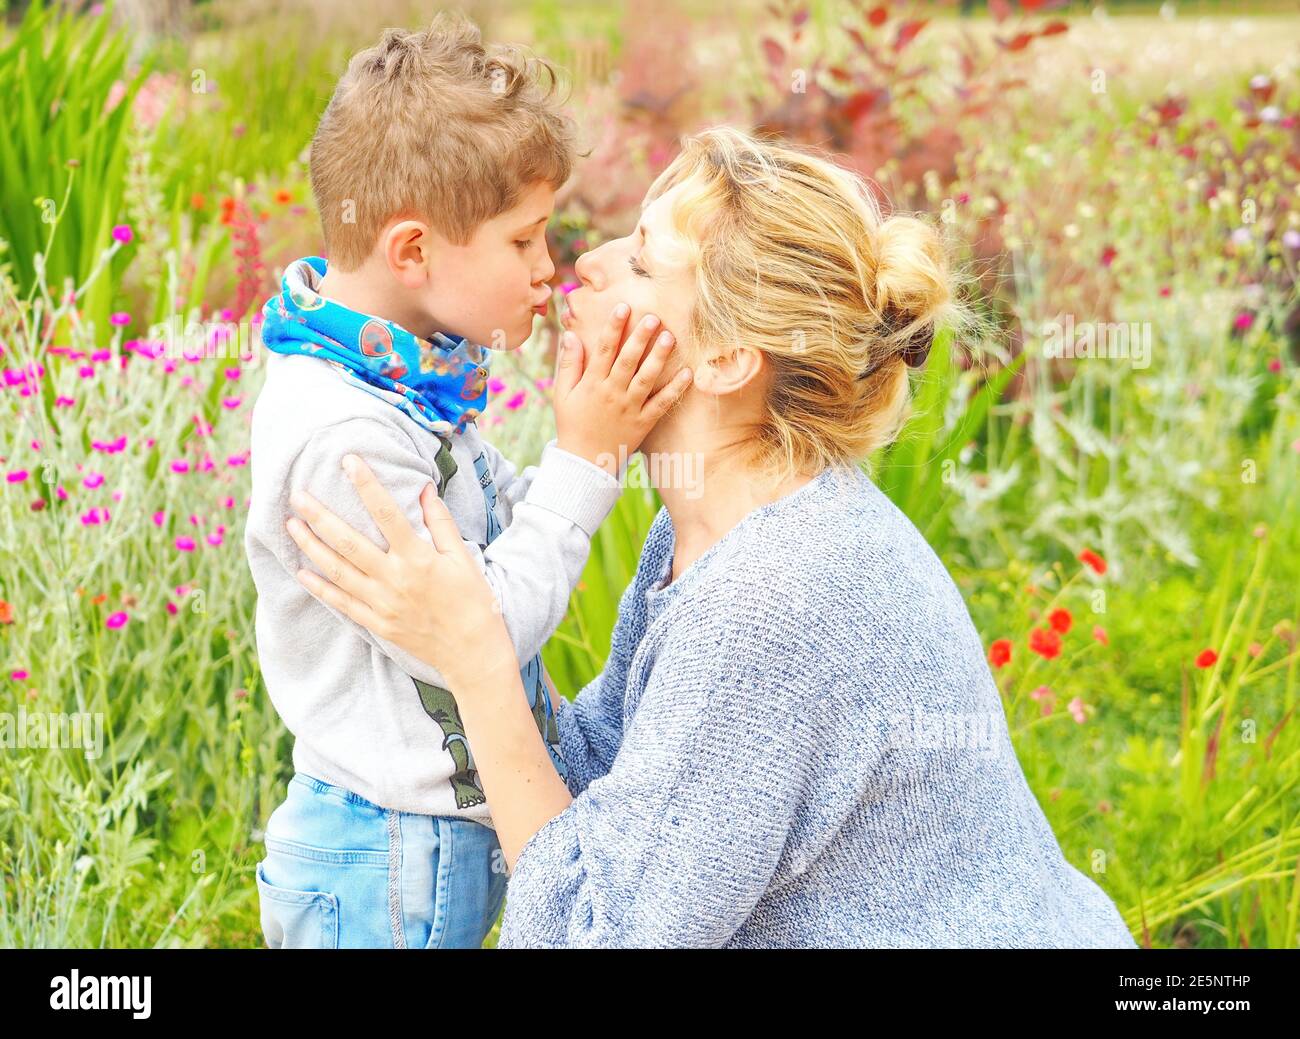 Mother and son hug and kiss in the garden with flowers Stock Photo